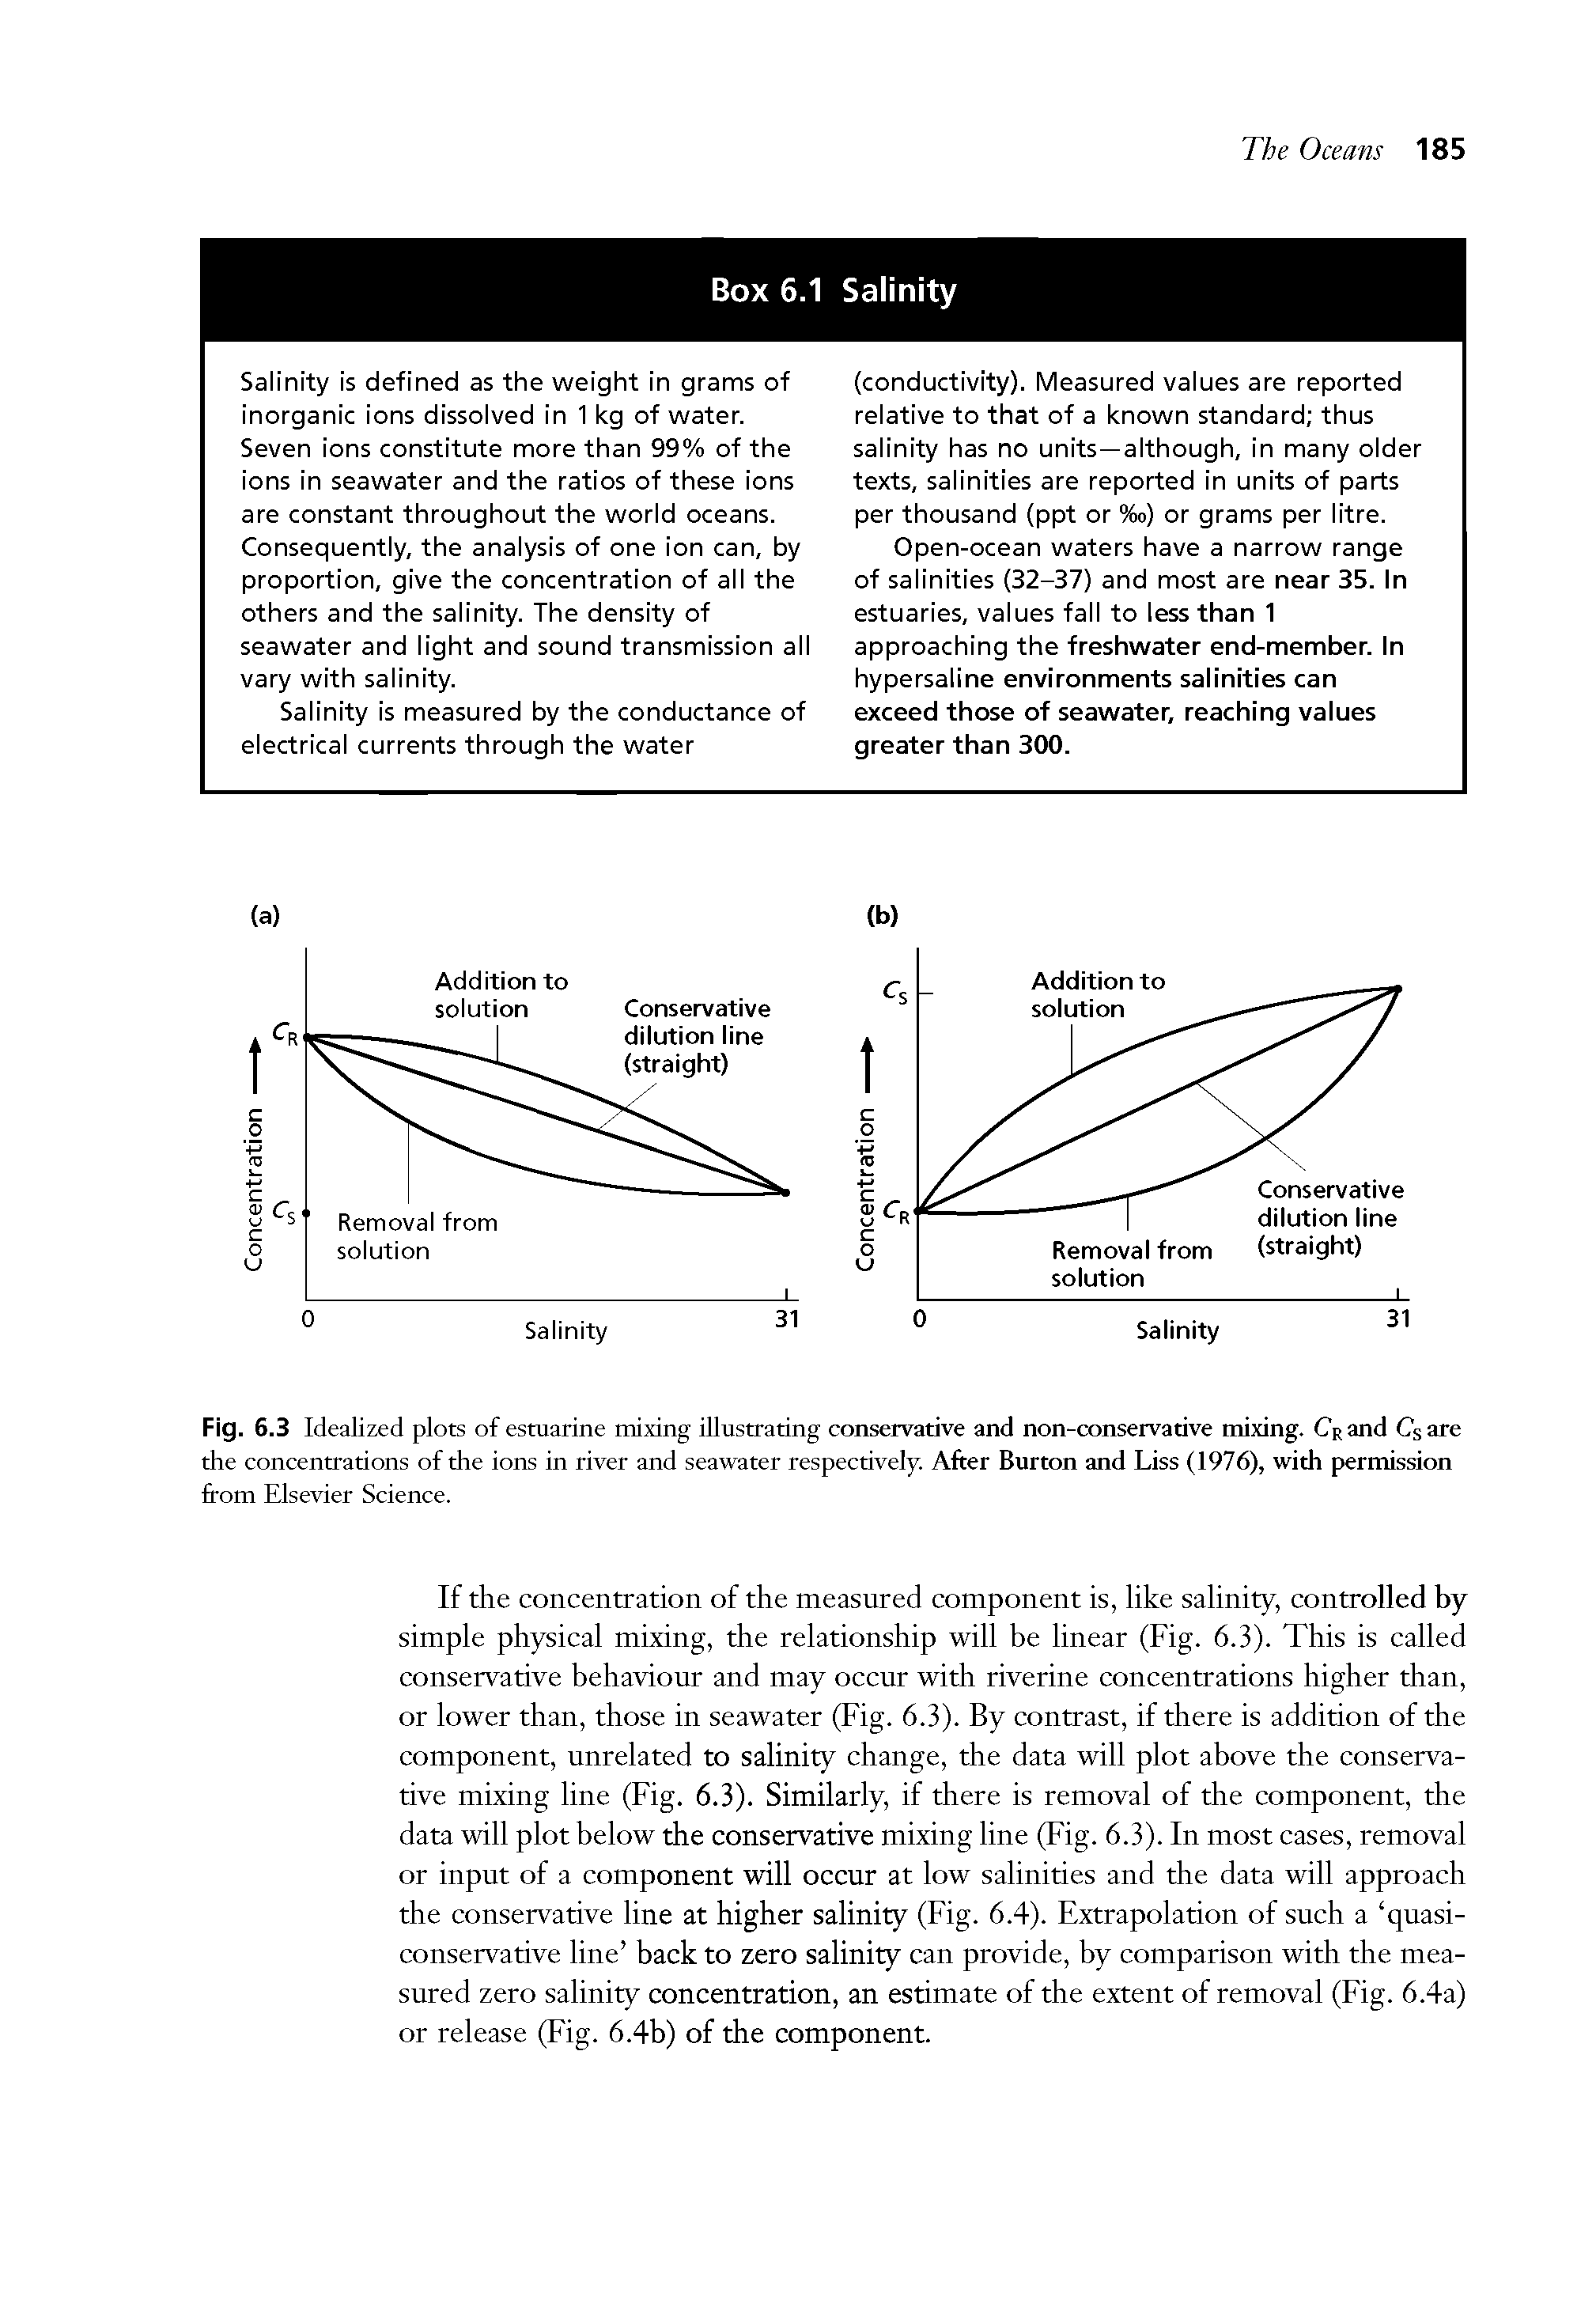 Fig. 6.3 Idealized plots of estuarine mixing illustrating conservative and non-conservative mixing. Cp and Csare the concentrations of the ions in river and seawater respectively. After Burton and Liss (1976), with permission from Elsevier Science.